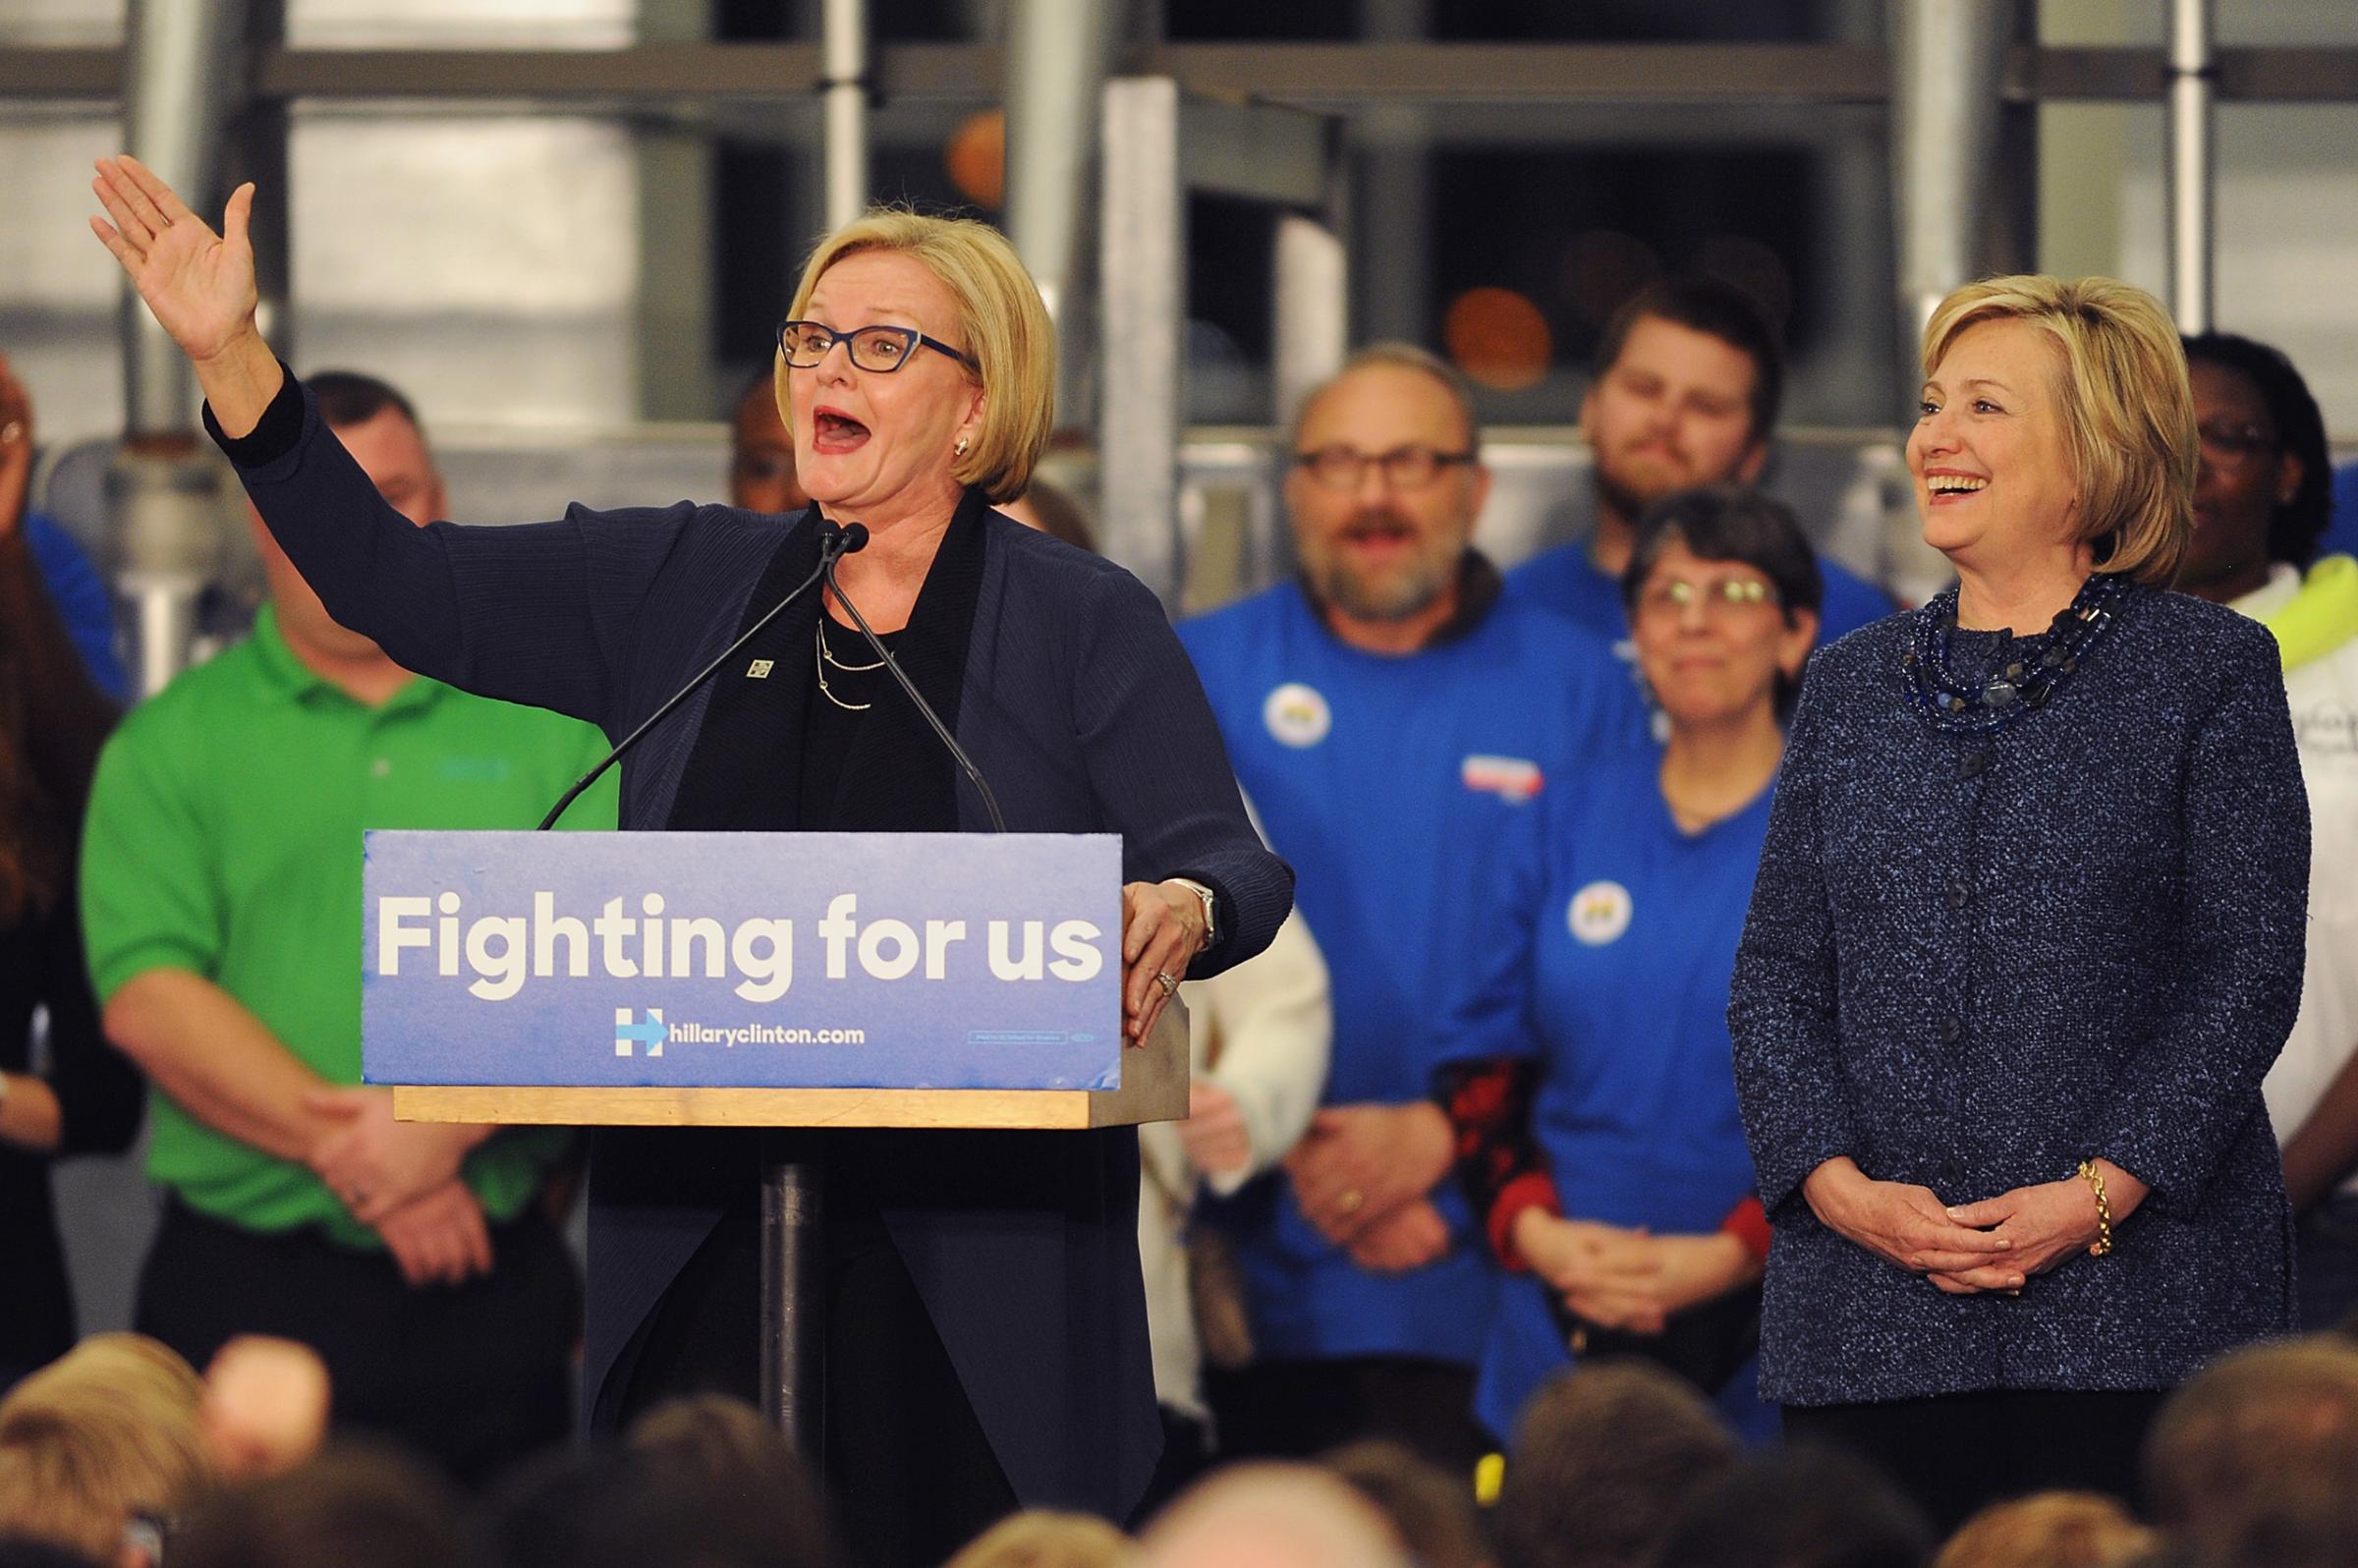 U.S. Senator Claire McCaskill introduces Democratic Presidential candidate Hillary Clinton prior to speaking during a campaign event at the International Association of Sheet Metal, Air, Rail and Transportation Workers in St. Louis, on Dec. 11, 2015.